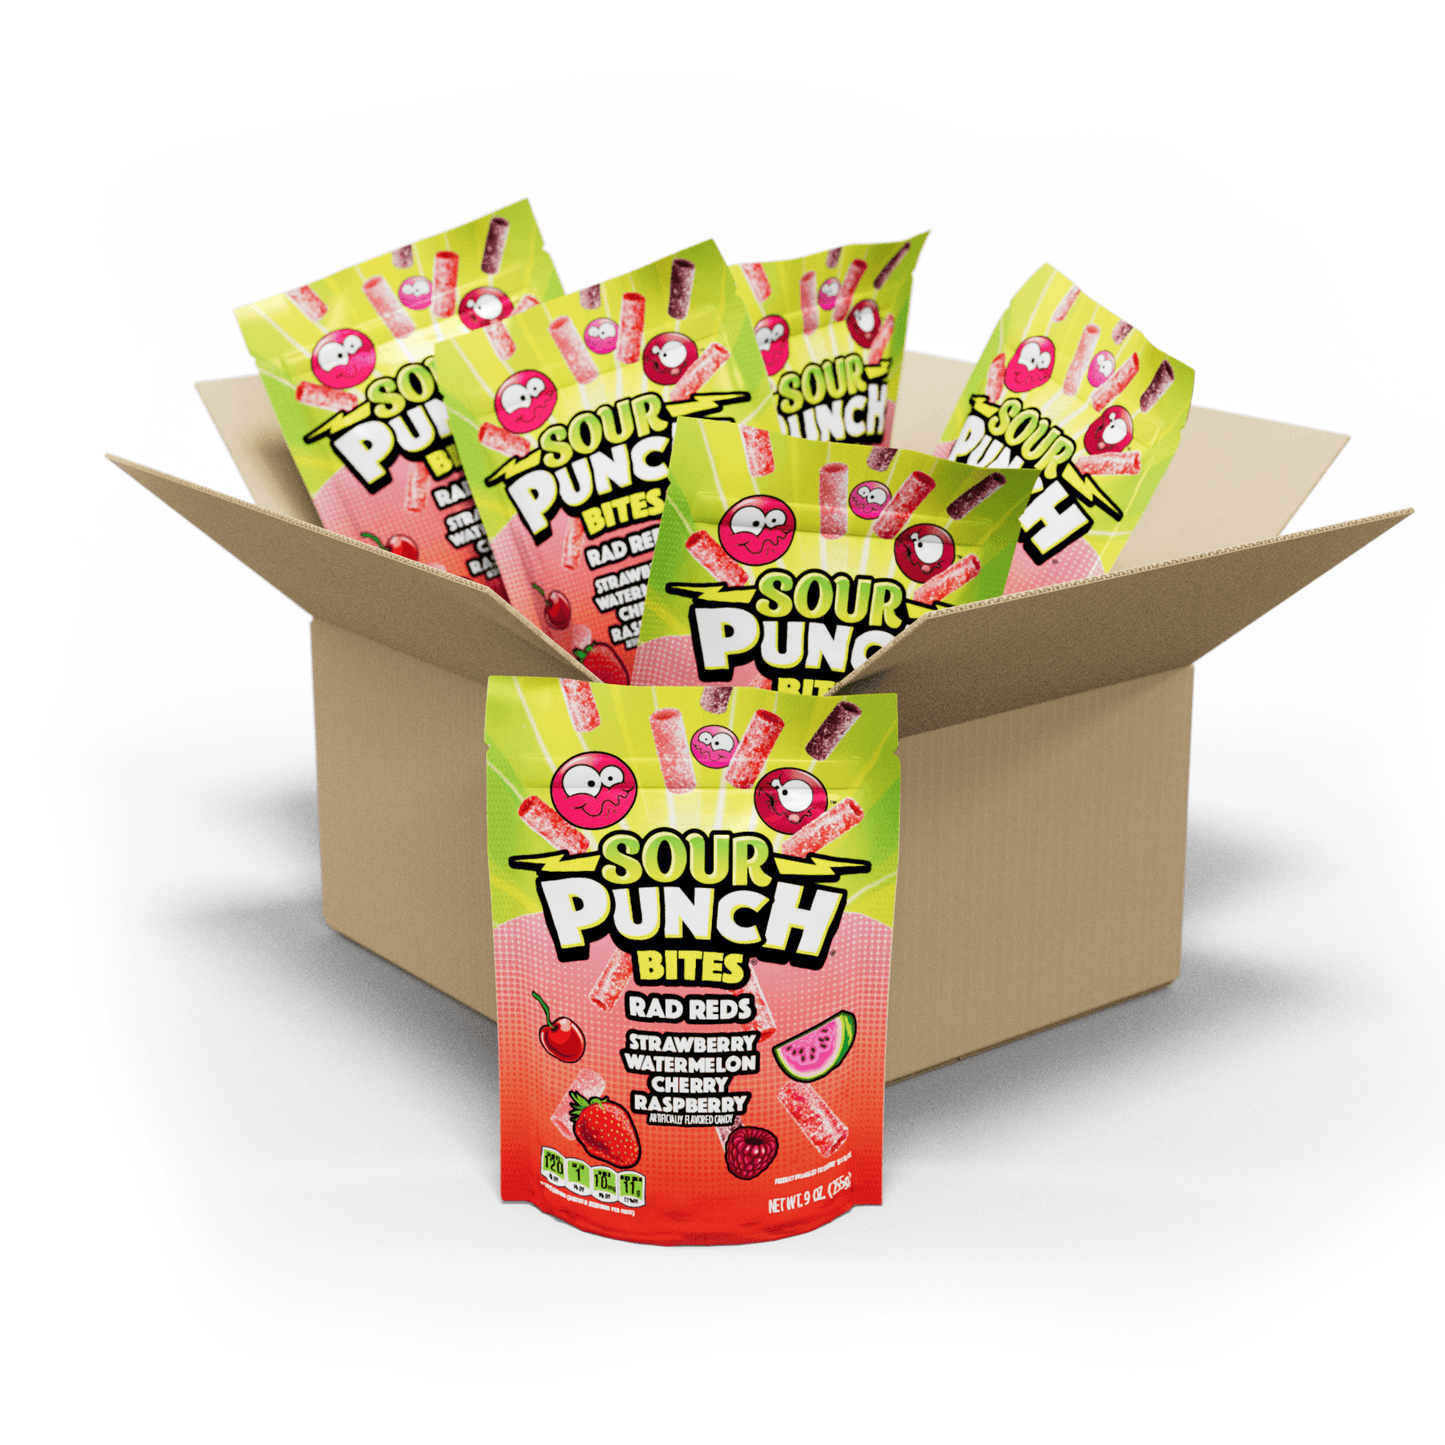 6 count bulk candy box of Sour Punch Bites Rad Reds 9oz Stand up bags